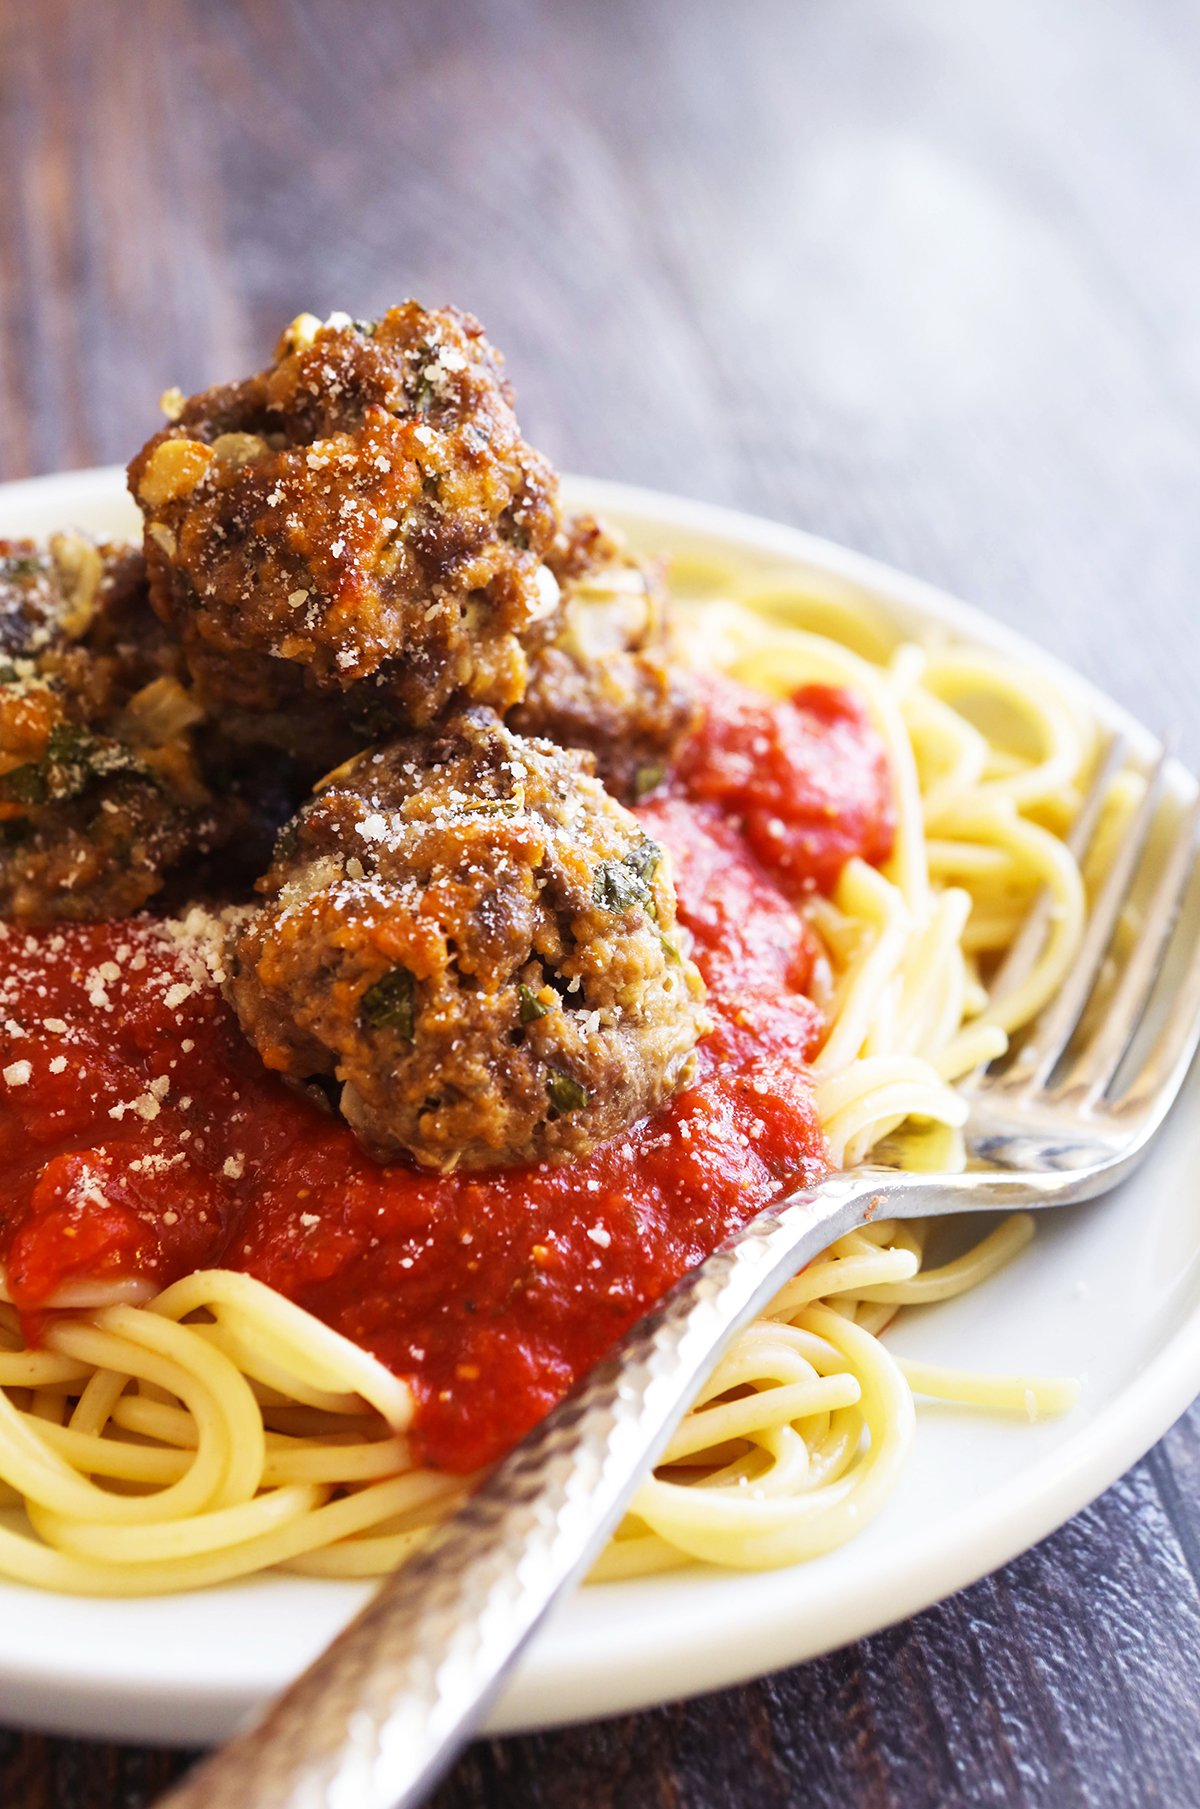 Heaping plate of spaghetti with sauce and meatballs.